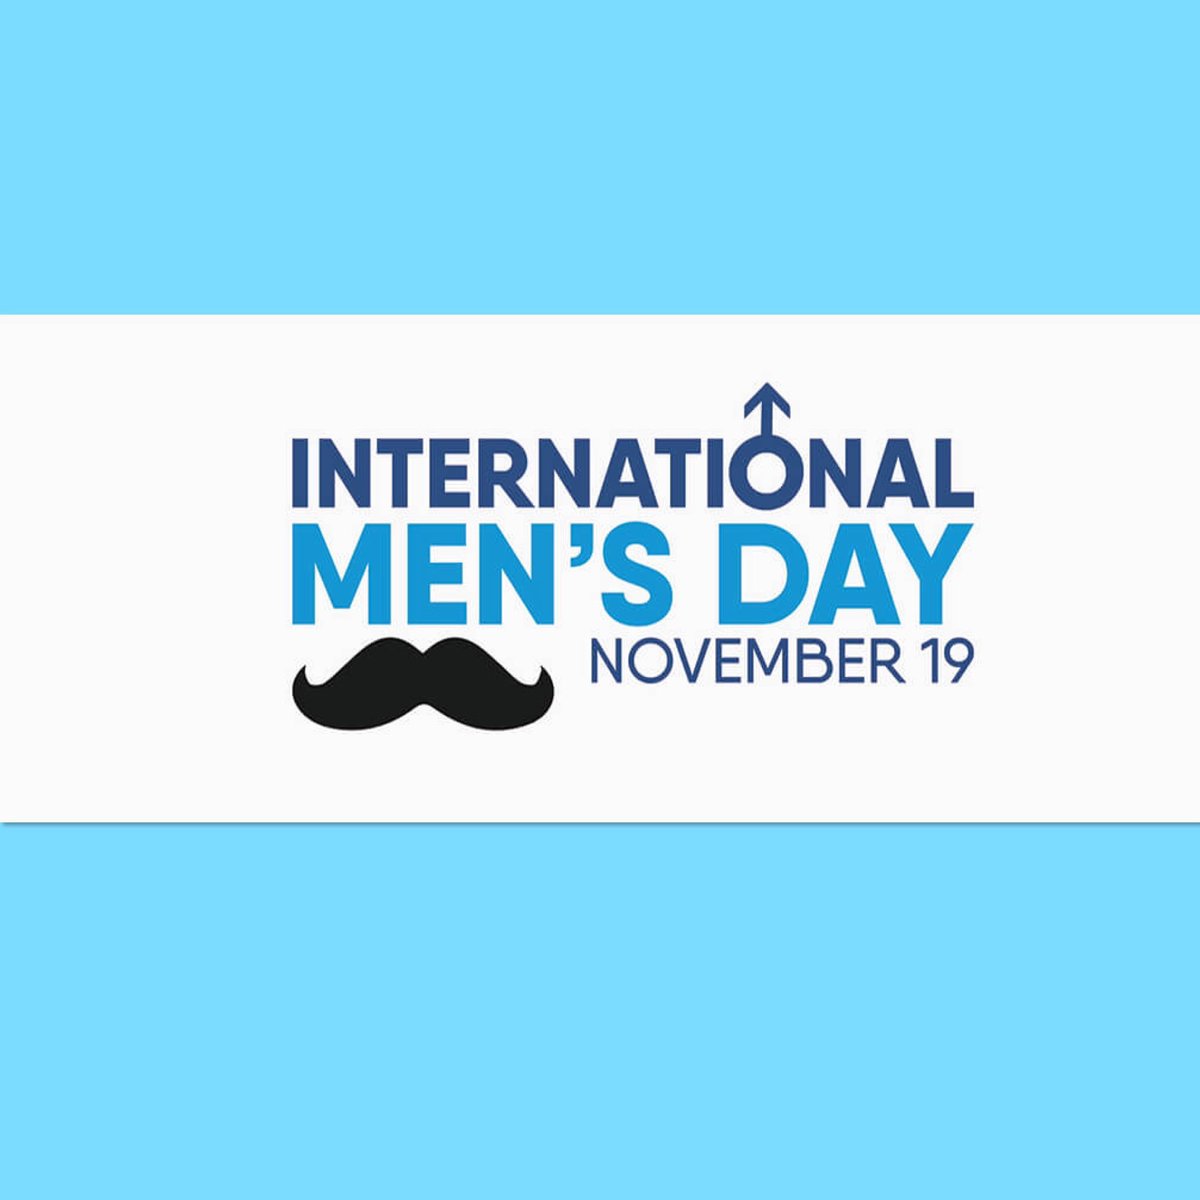 Happy @intl_mens_day to all our supporters, mentors and allies. Thank you for taking a stand to help others but please remember to keep yourselves healthy and looked after #ZeroMaleSuicide. To the men in @DerbyshireFRS who stand up, challenge and support - we salute you!